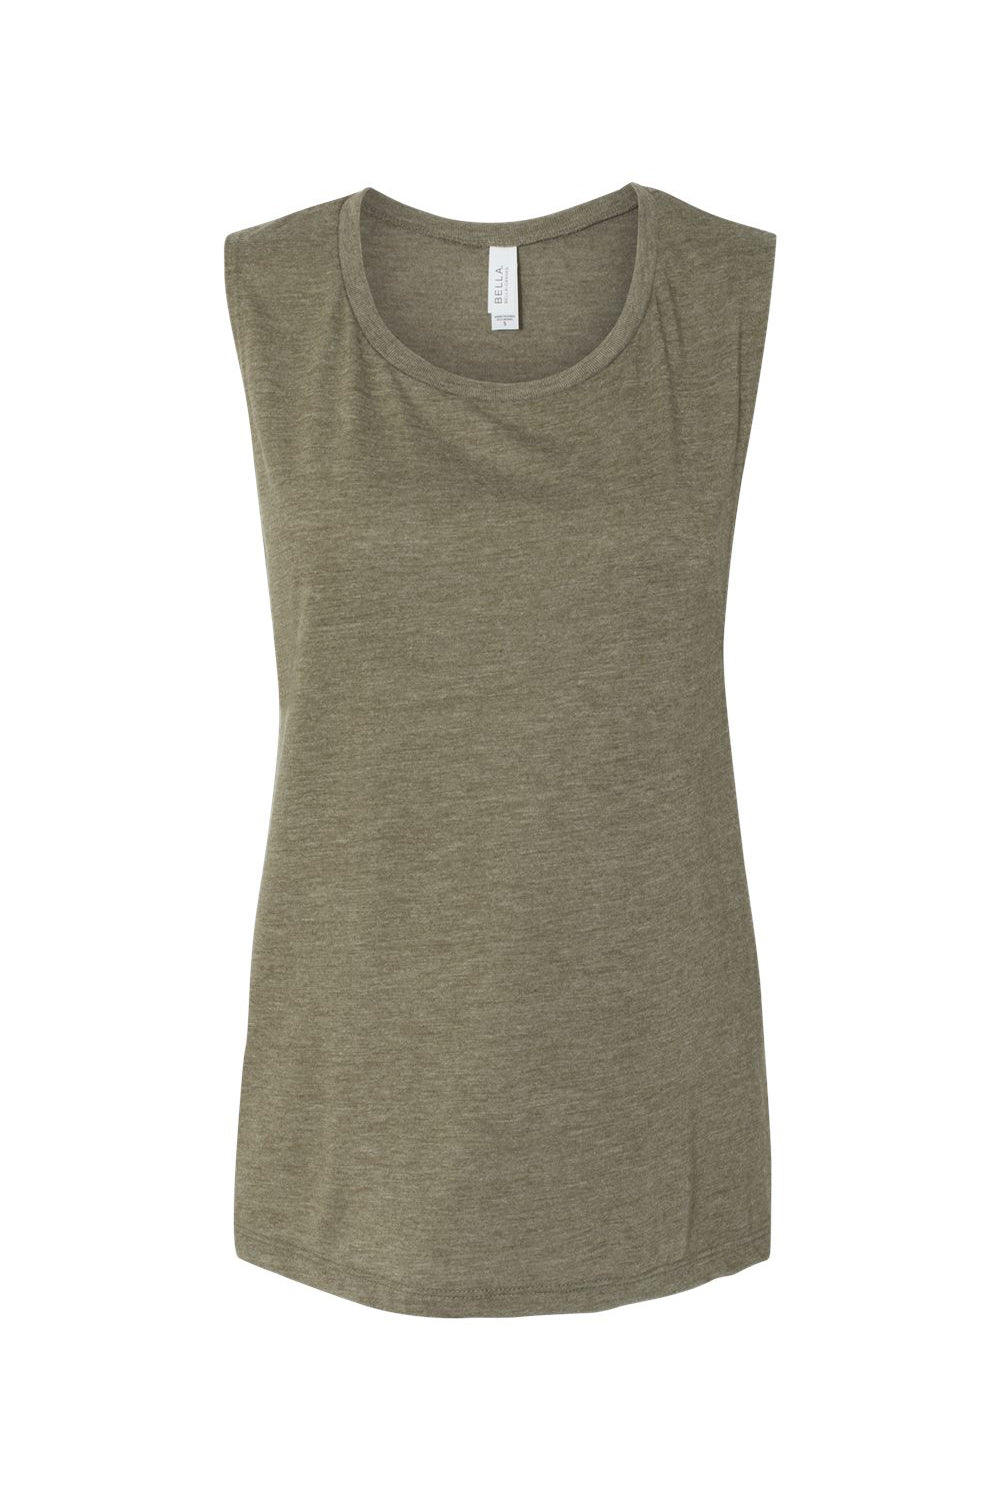 Bella + Canvas BC8803/B8803/8803 Womens Flowy Muscle Tank Top Heather Olive Green Flat Front